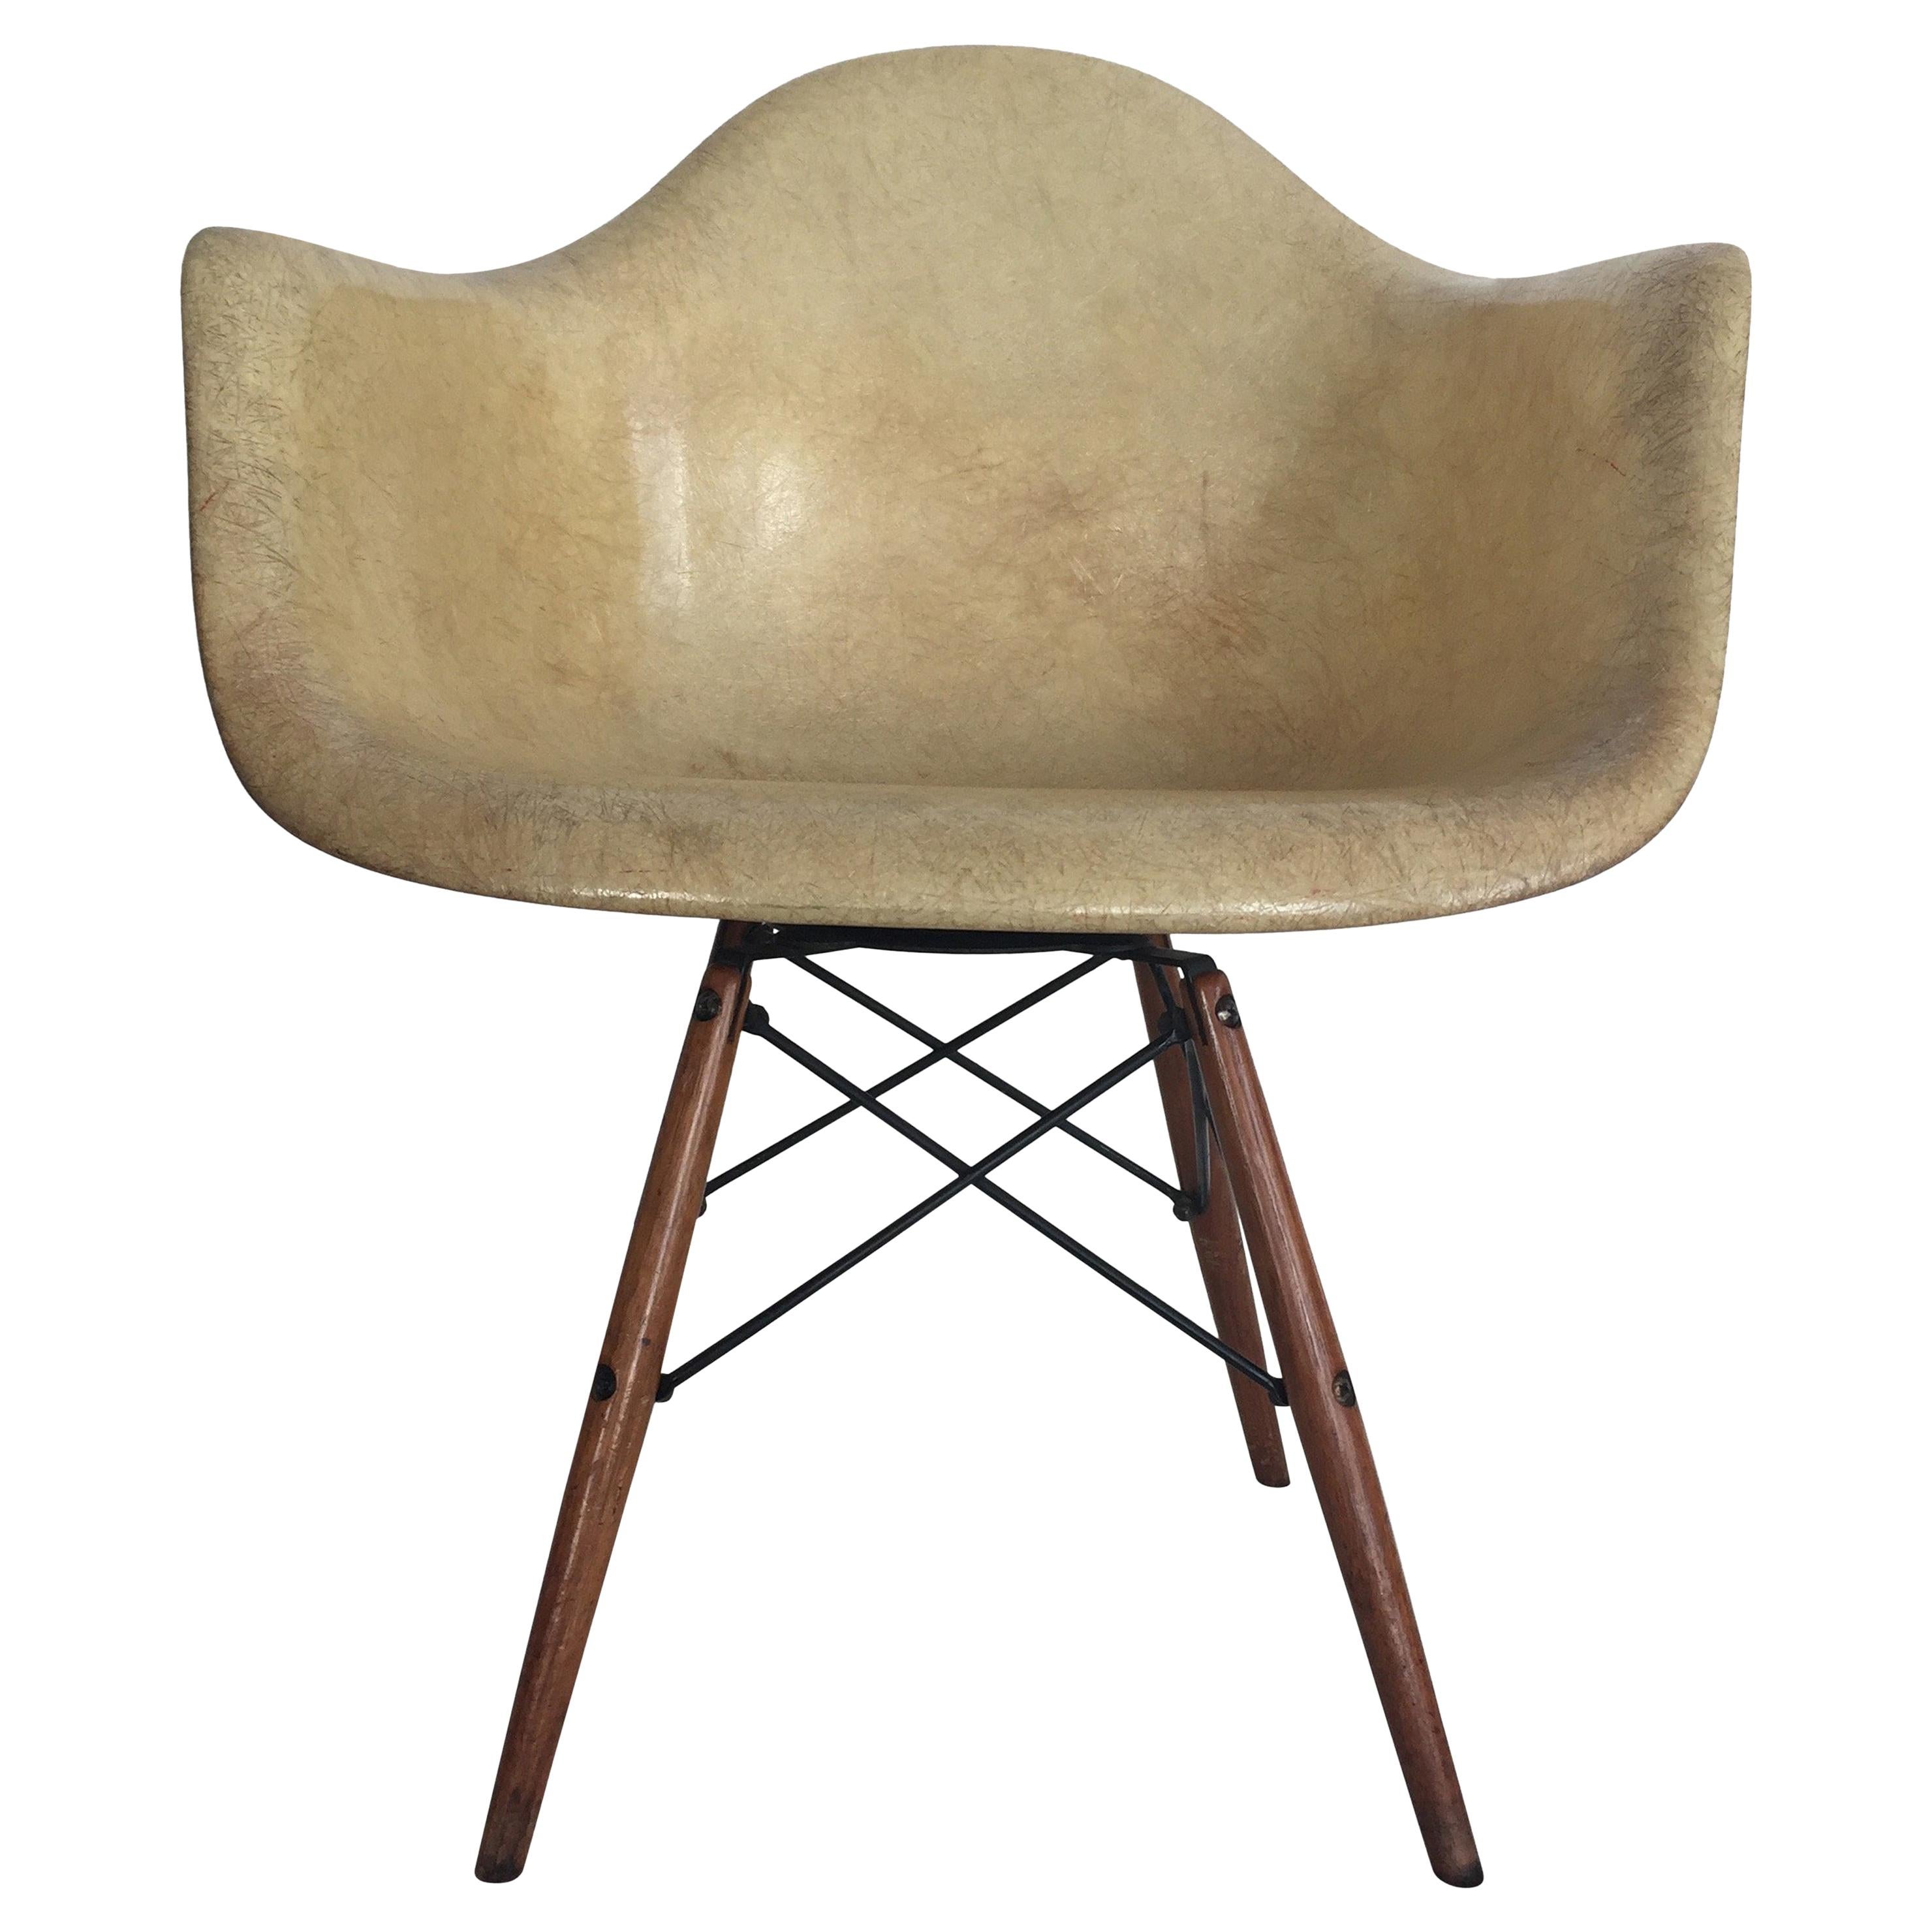 First Edition Charles Eames Paw Chair Swivel Fibre Glass Shell Dowel Leg Walnut For Sale